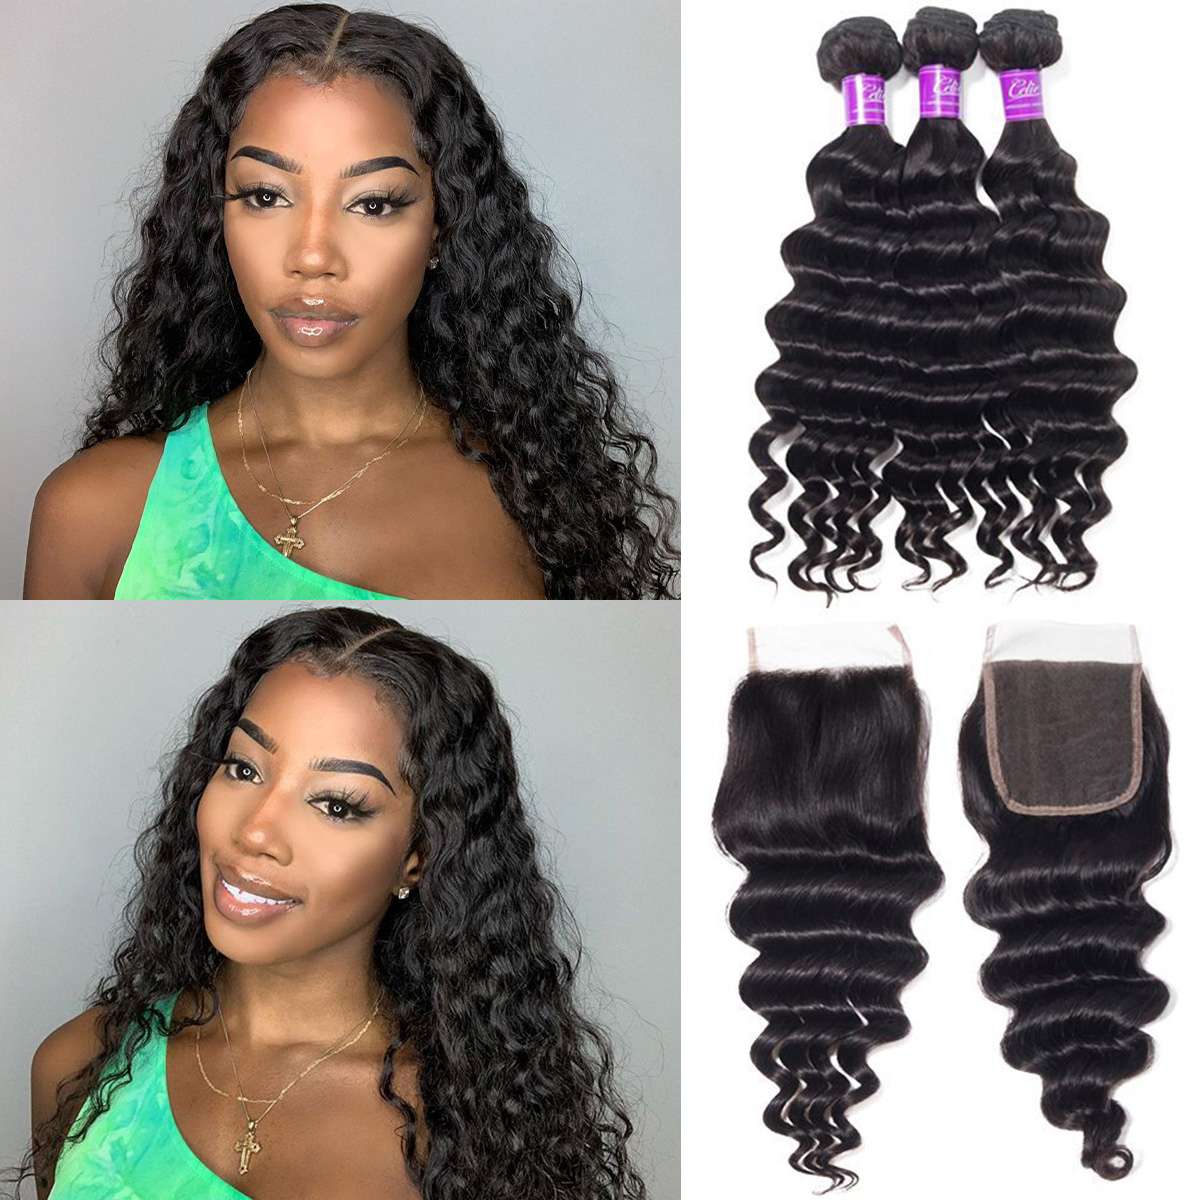 DHL Shipping Lace Cap With Adjustable Strap On The Back Weave Cap And 3  Bundles Brazilian Hair Wefts Hair Weaving From Gorgeousdreamhair, $126.64